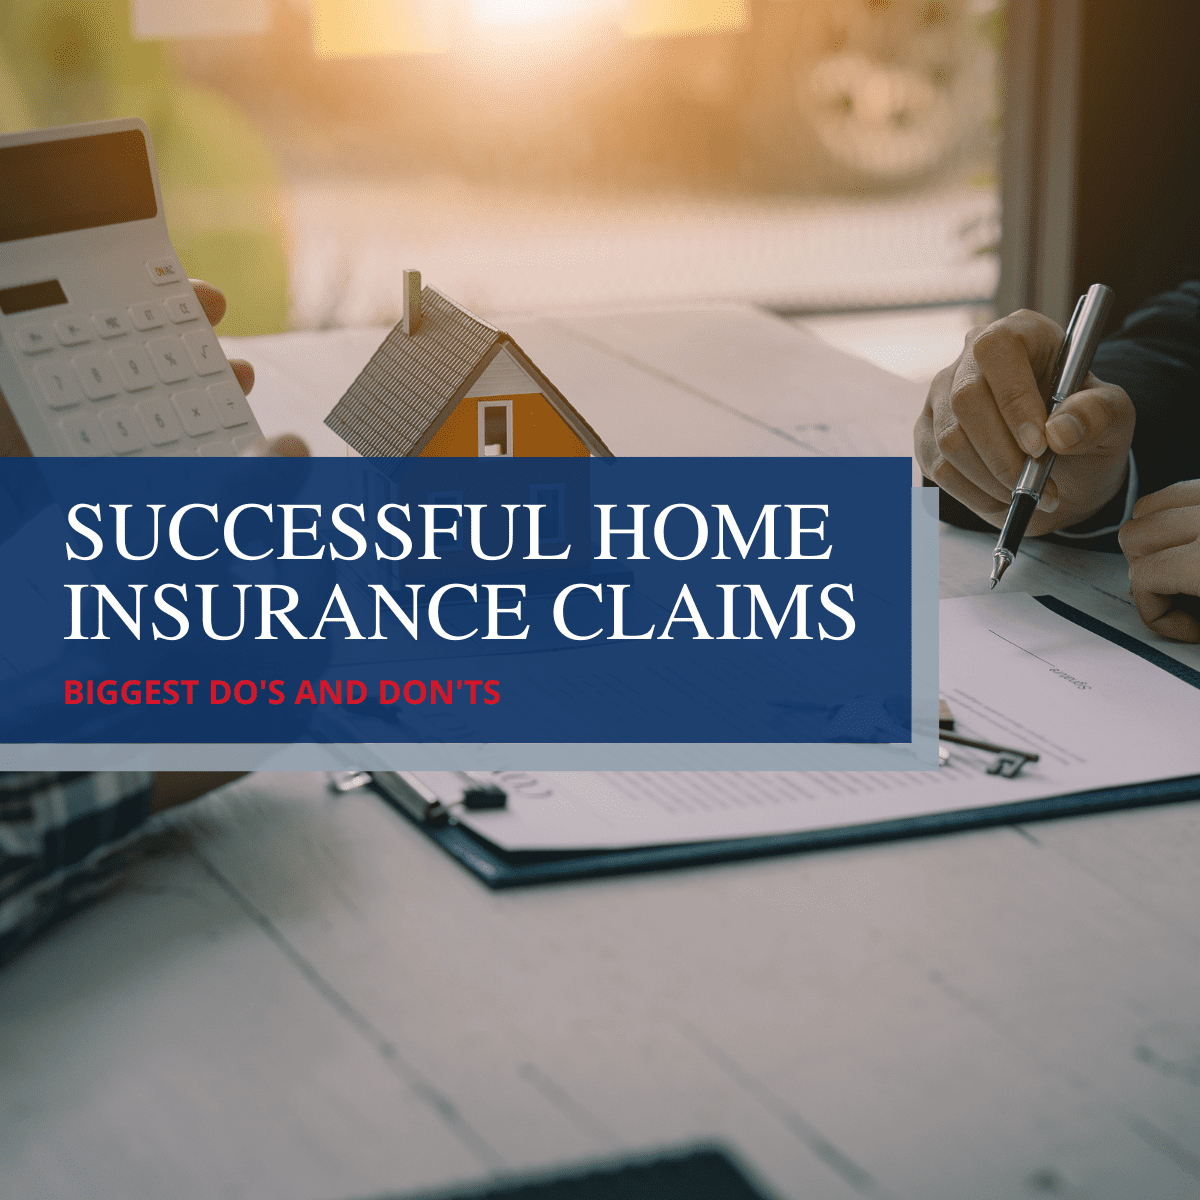 Biggest Do's and Don'ts for Filing Successful Home Insurance Claims